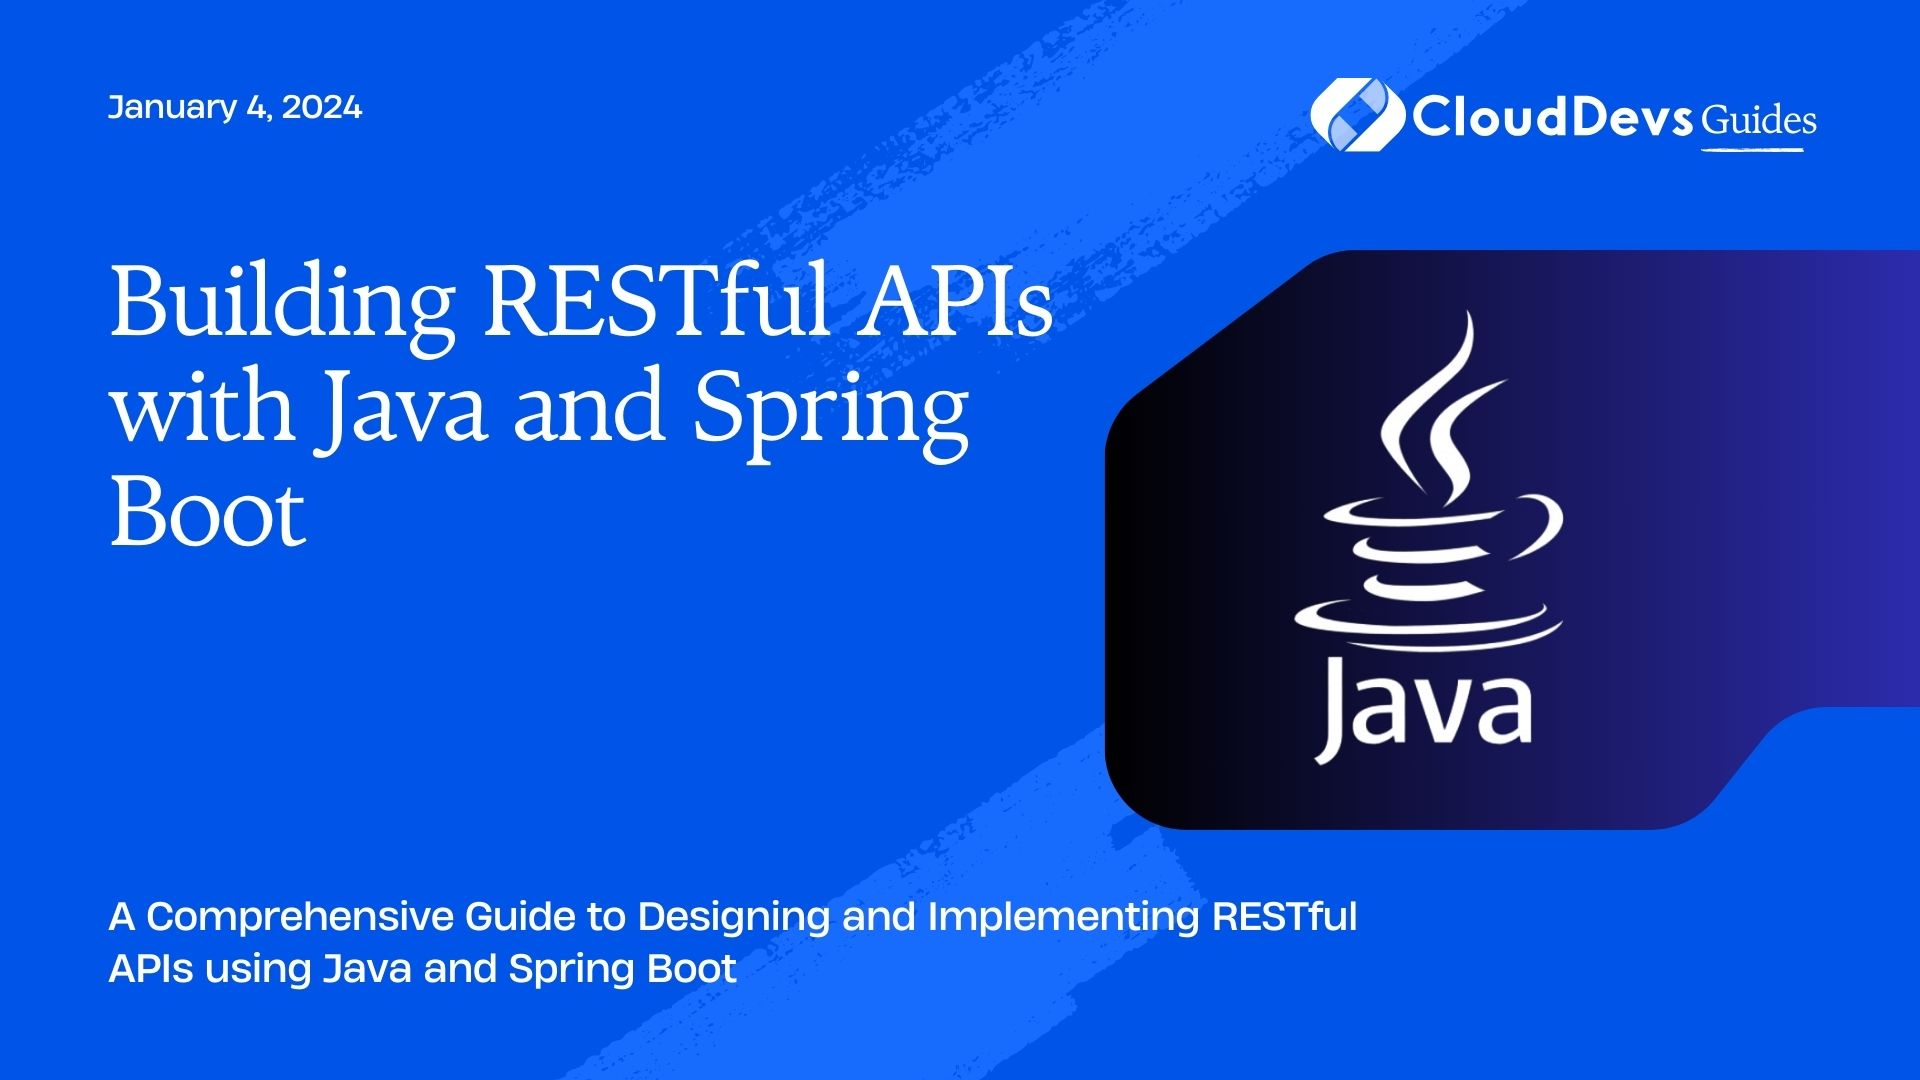 Building RESTful APIs with Java and Spring Boot